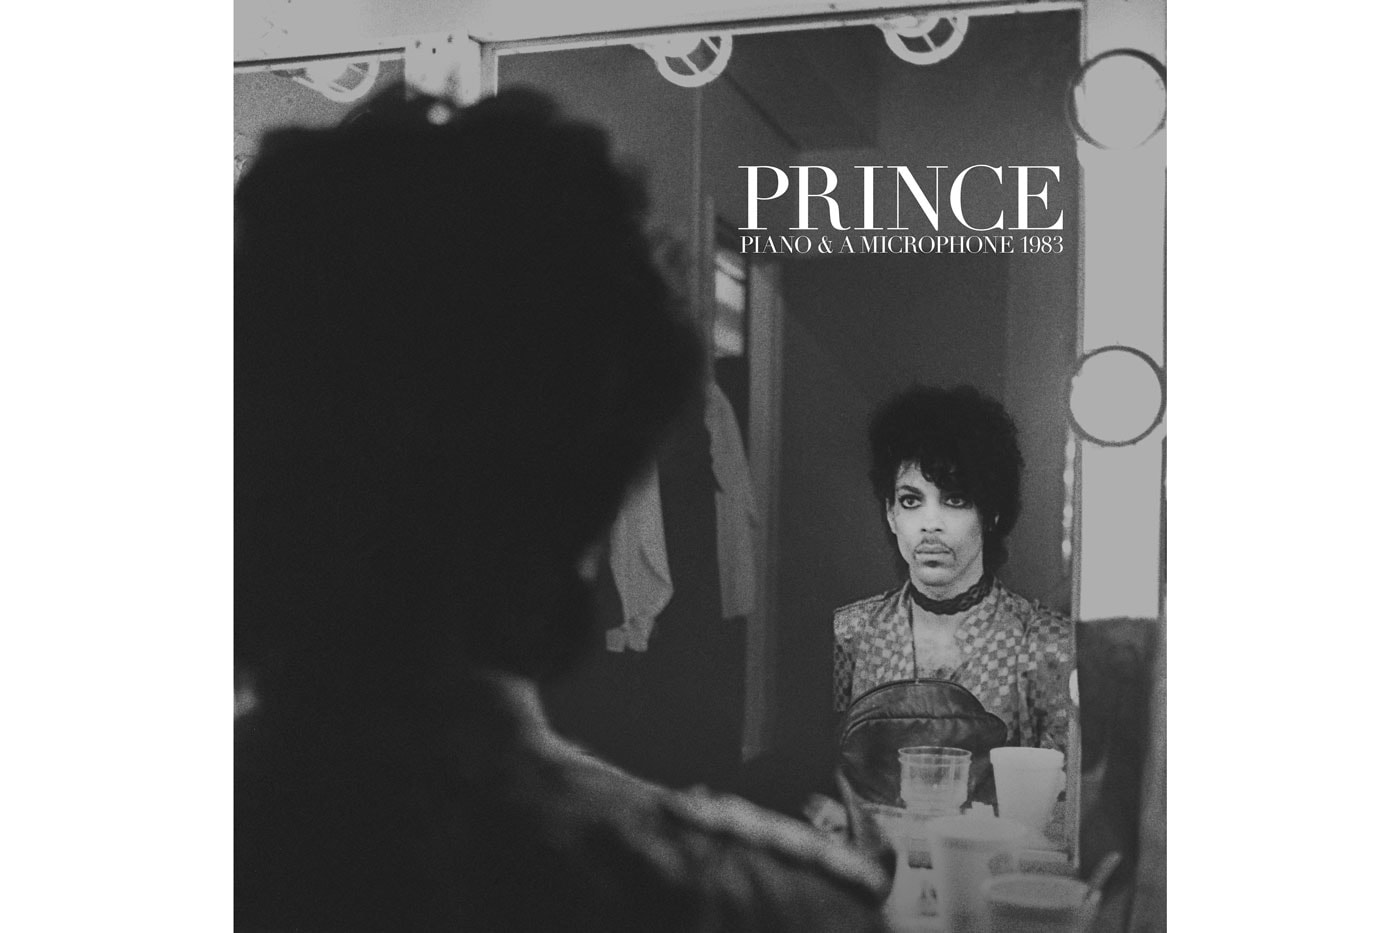 prince new why the butterflies stream single song apple music spotify listen september 2018 piano microphone demo unreleased estate